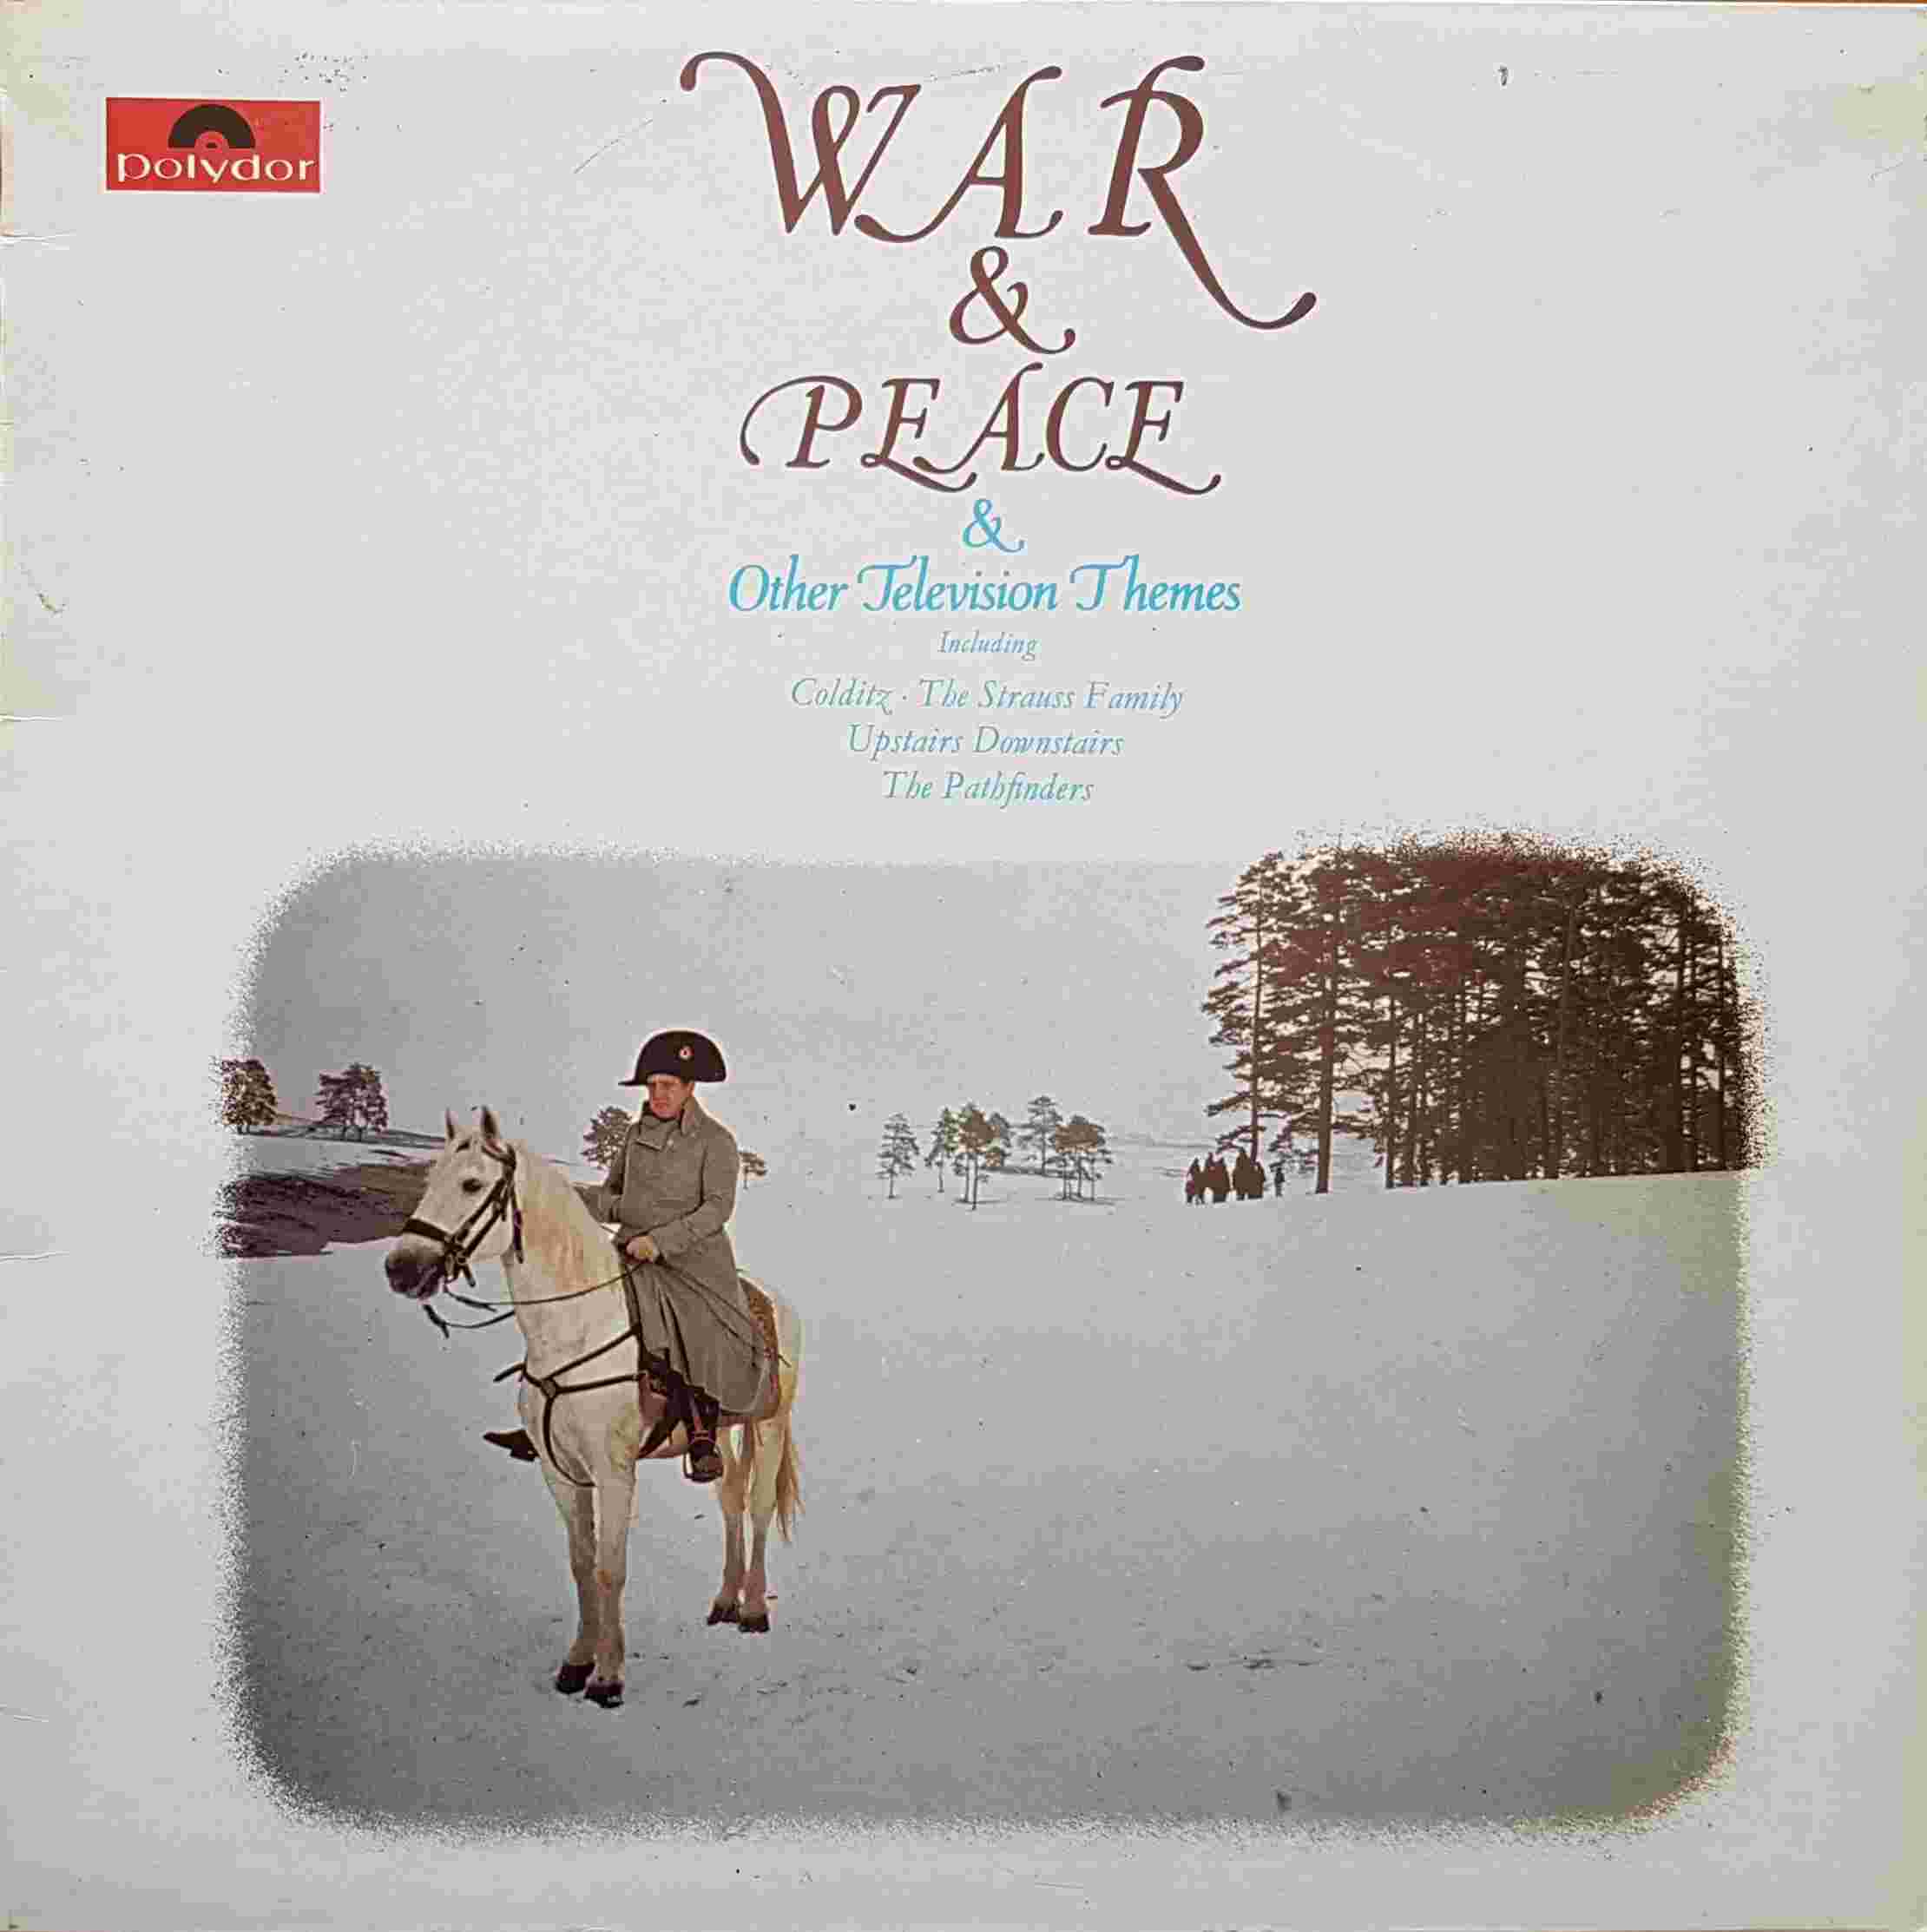 Picture of War and peace and other TV themes by artist Various from ITV, Channel 4 and Channel 5 albums library